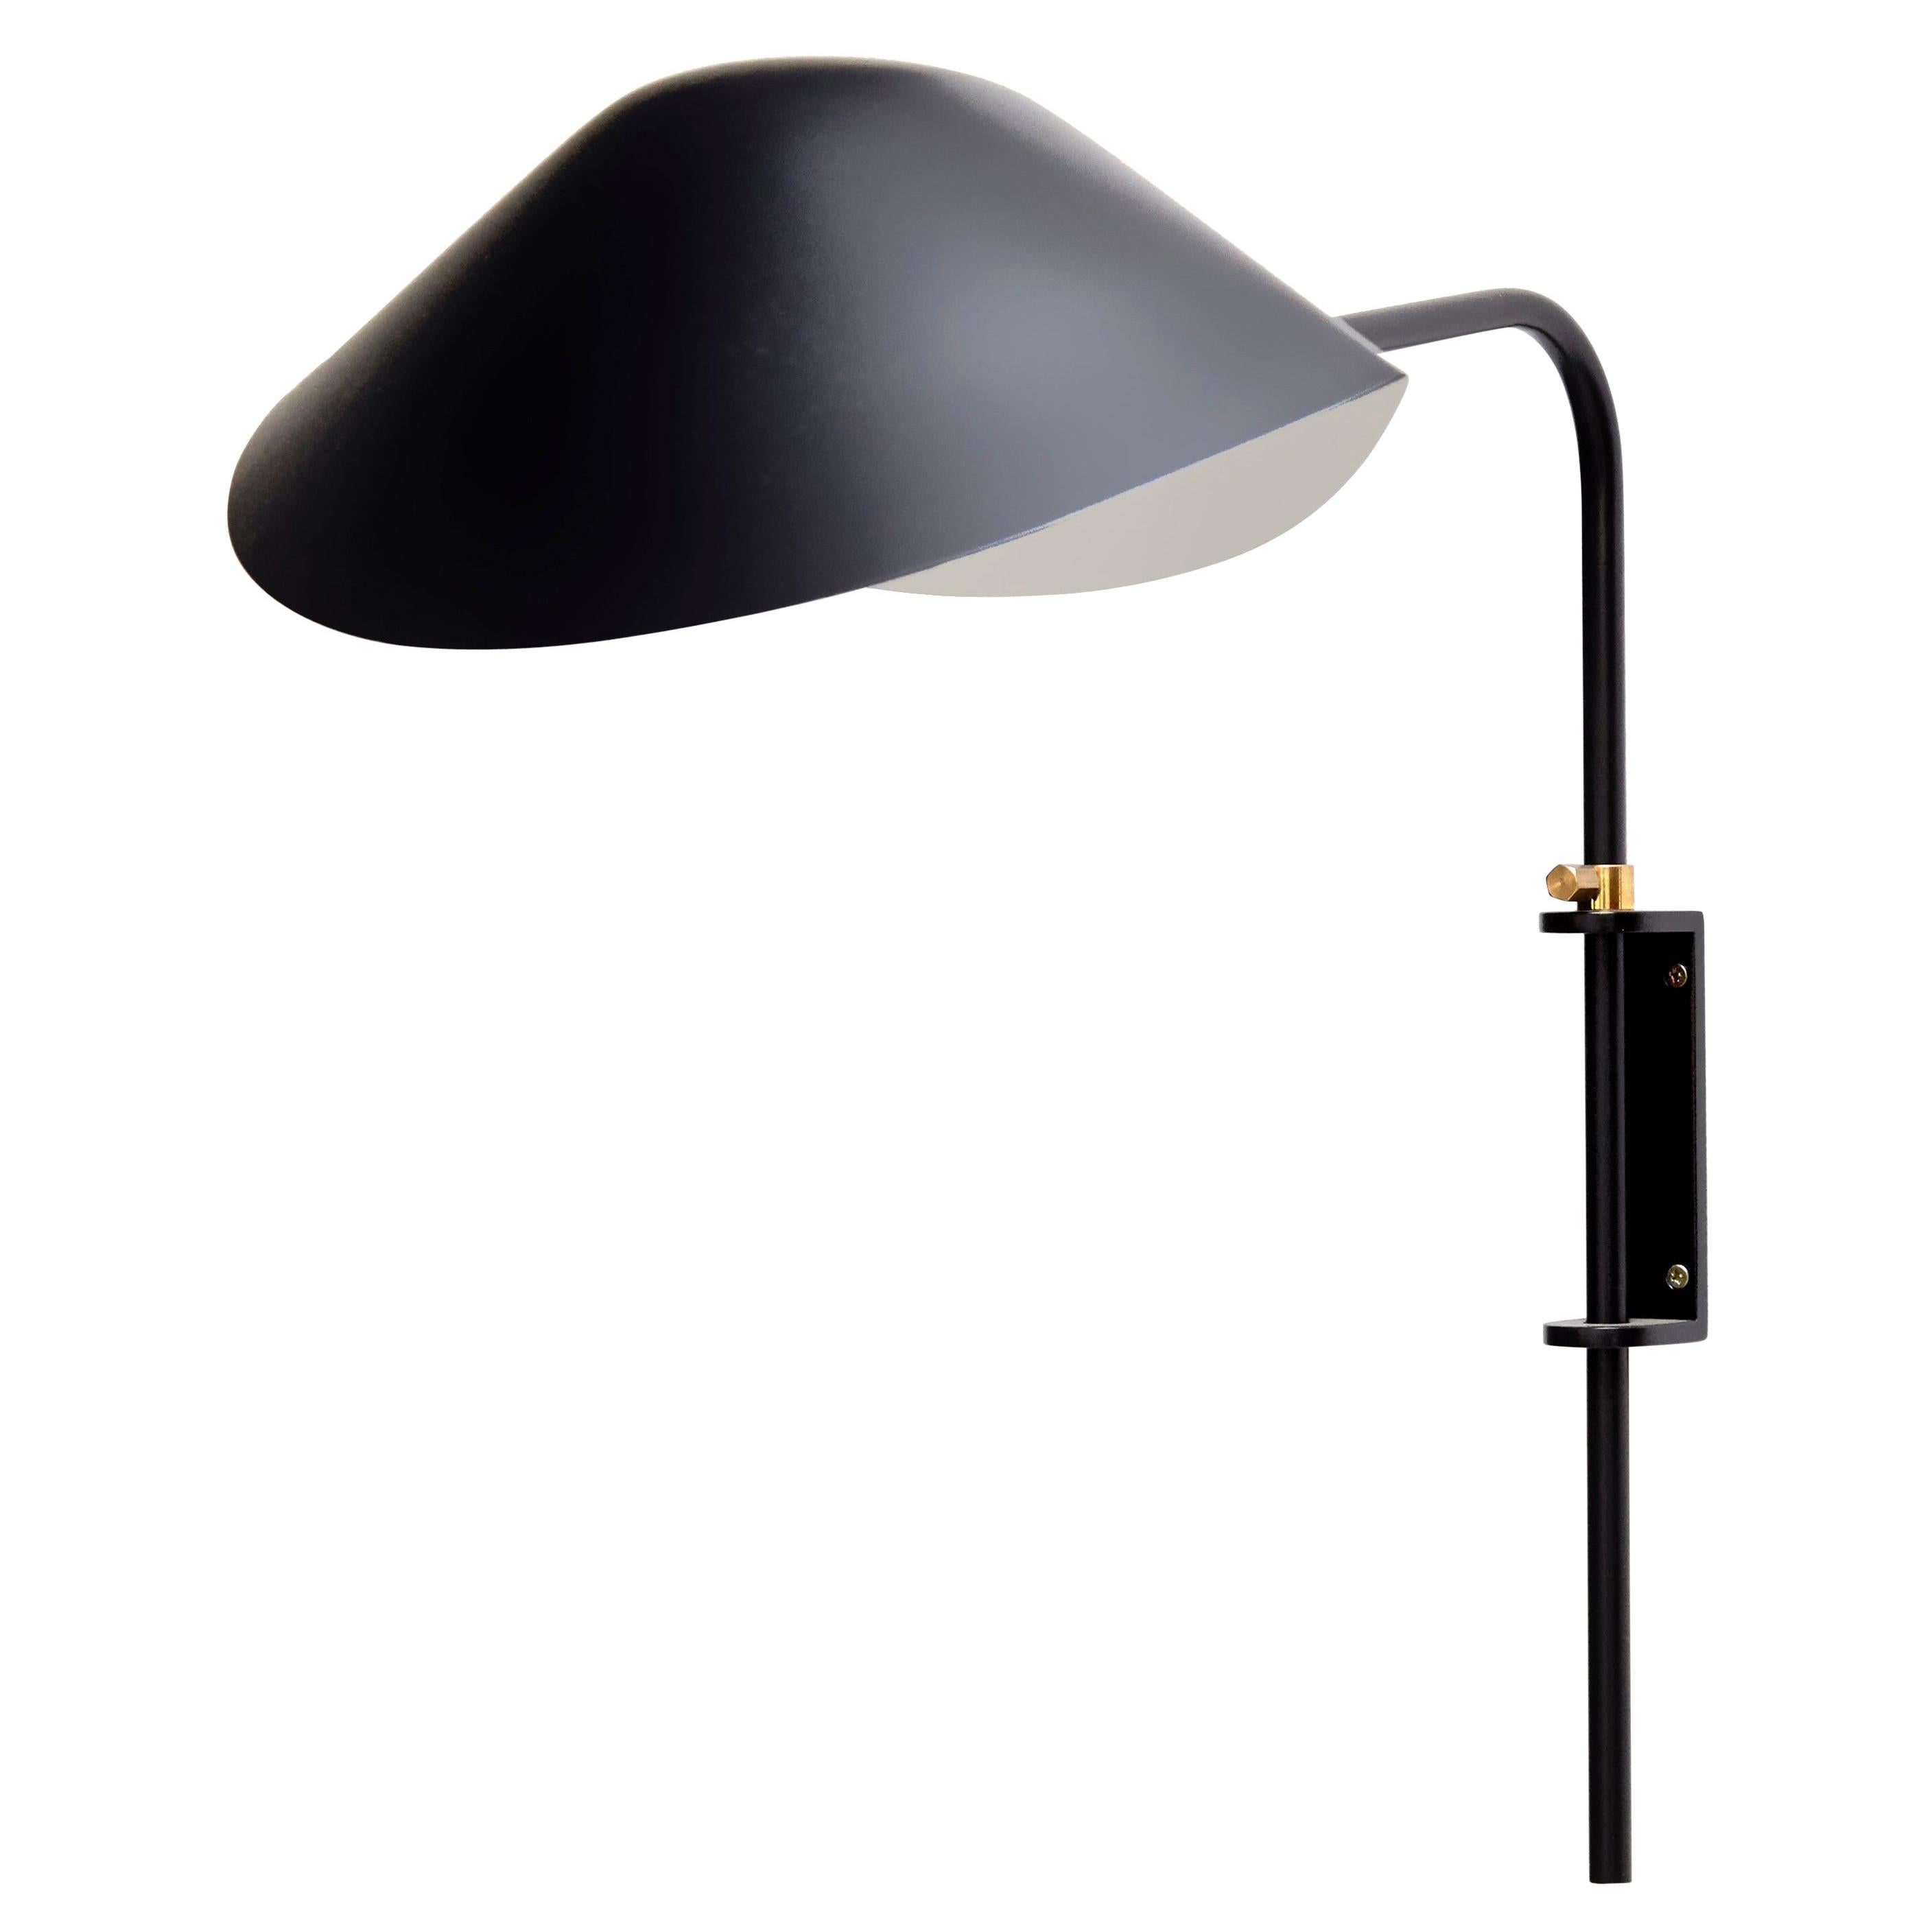 Serge Mouille Mid-Century Modern Black Anthony Wall Lamp Whit Fixing Bracket For Sale